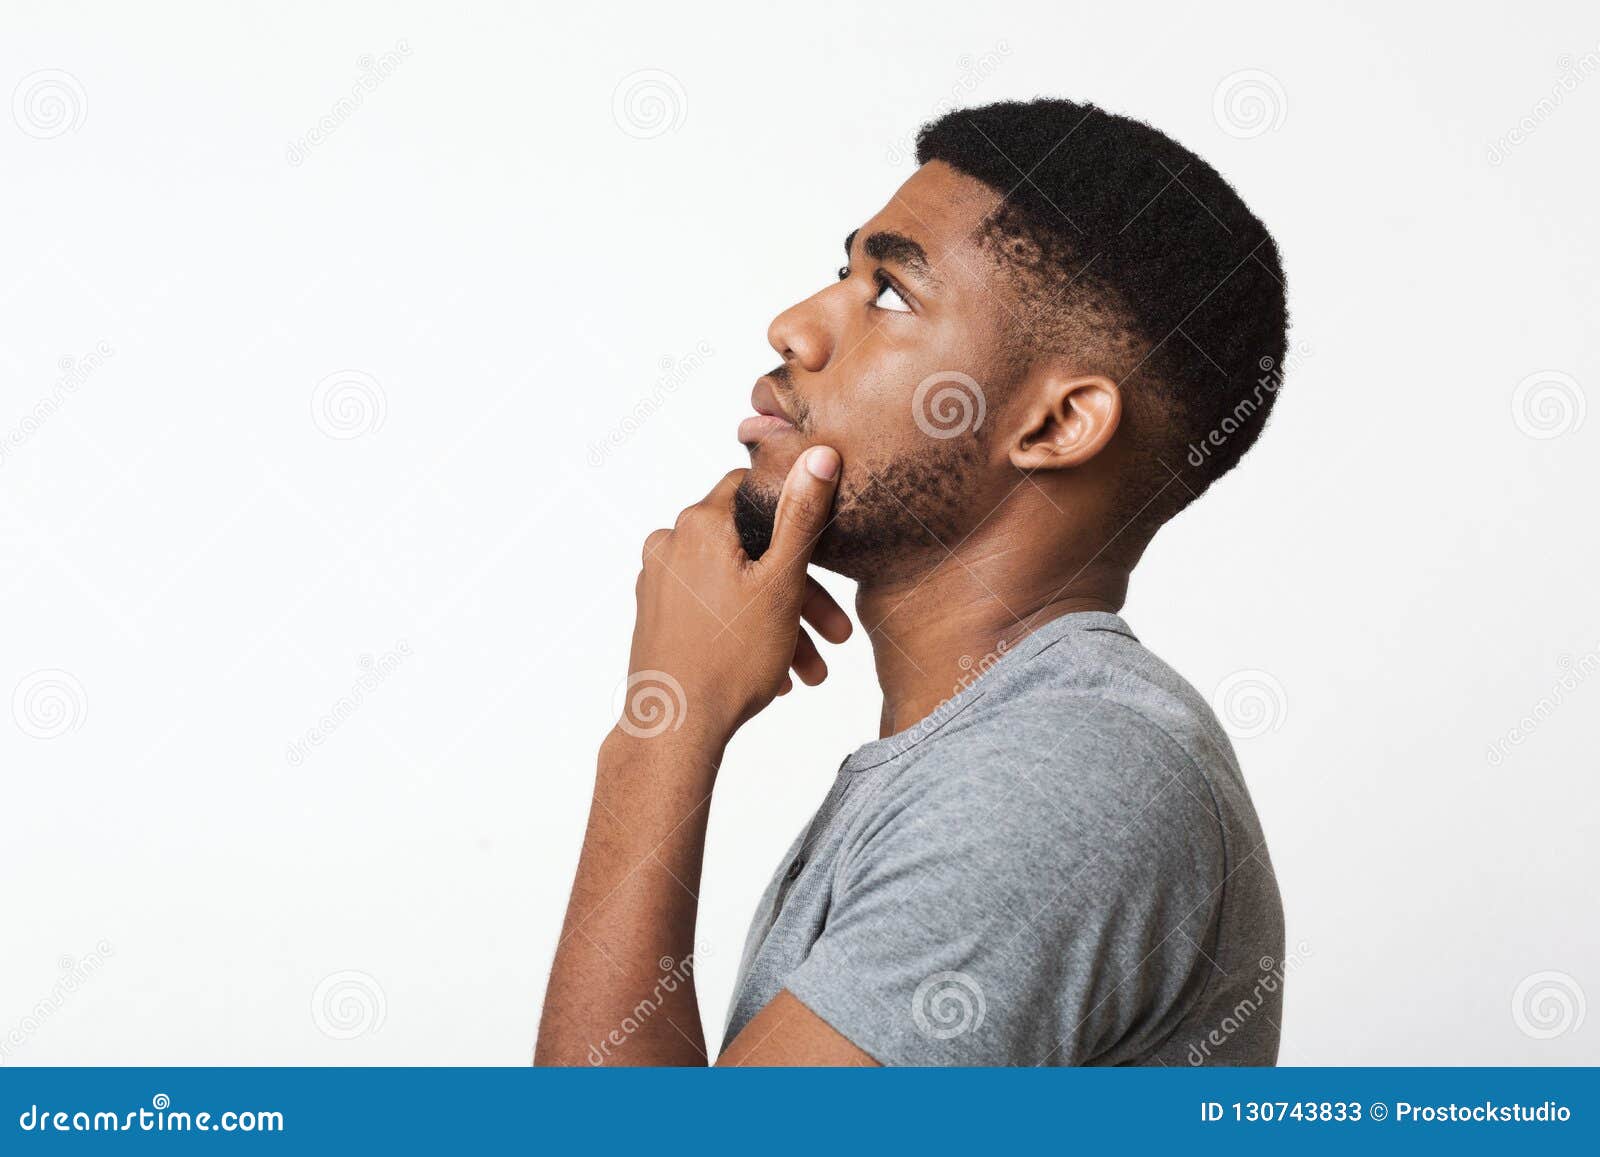 thoughtful african-american man profile portrait on white